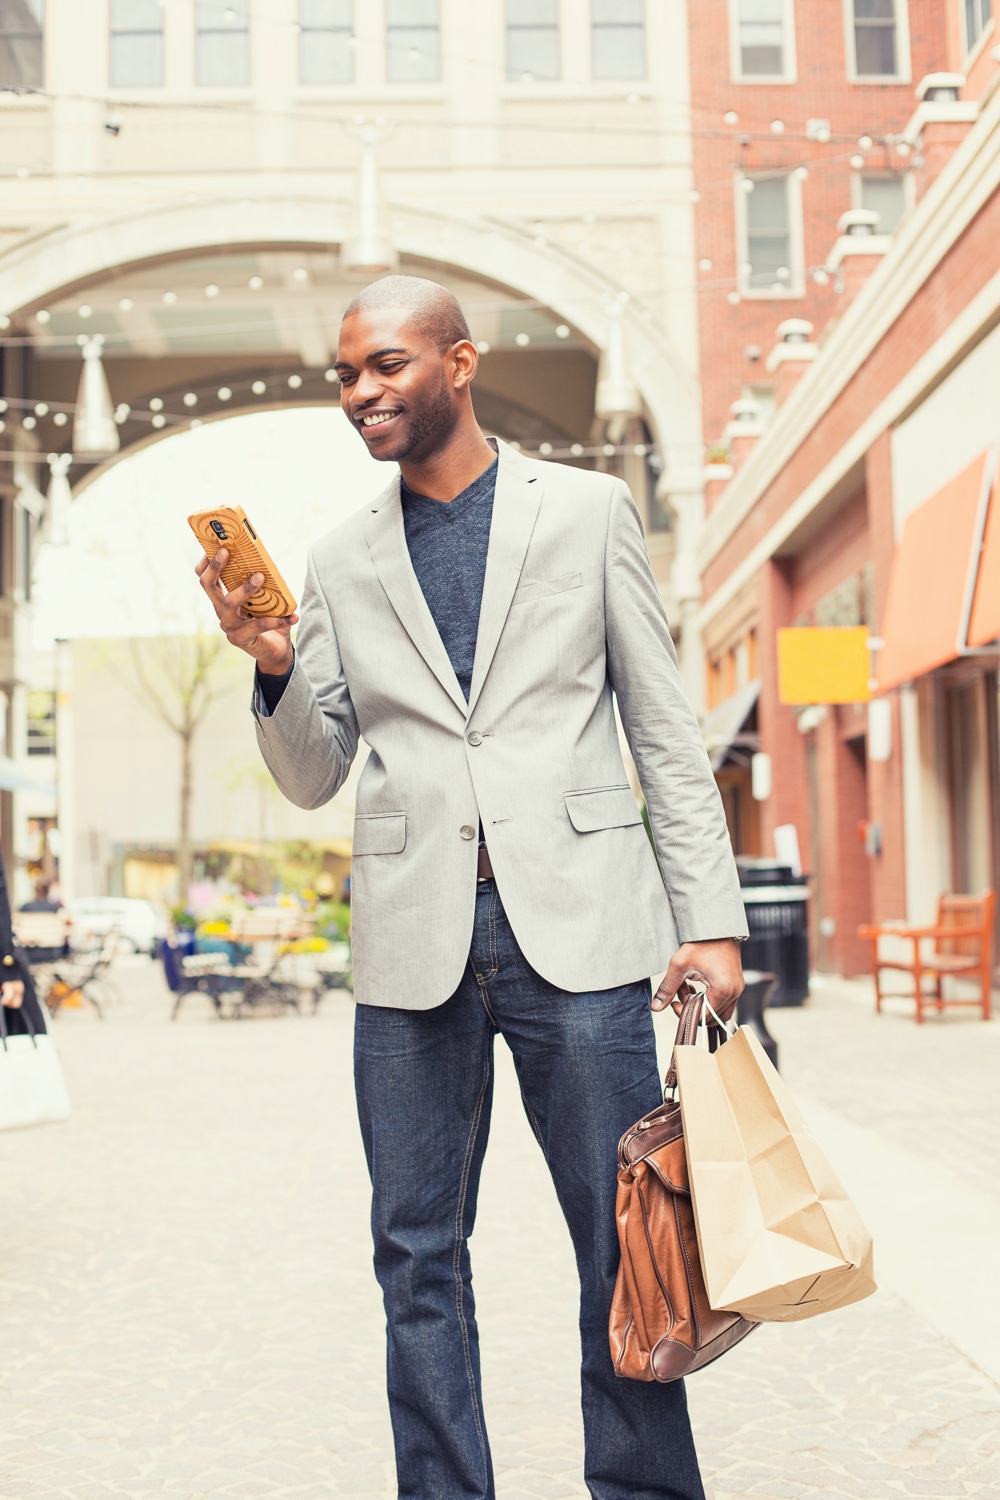 Man in Blazer on Phone Outside with Shopping Bags